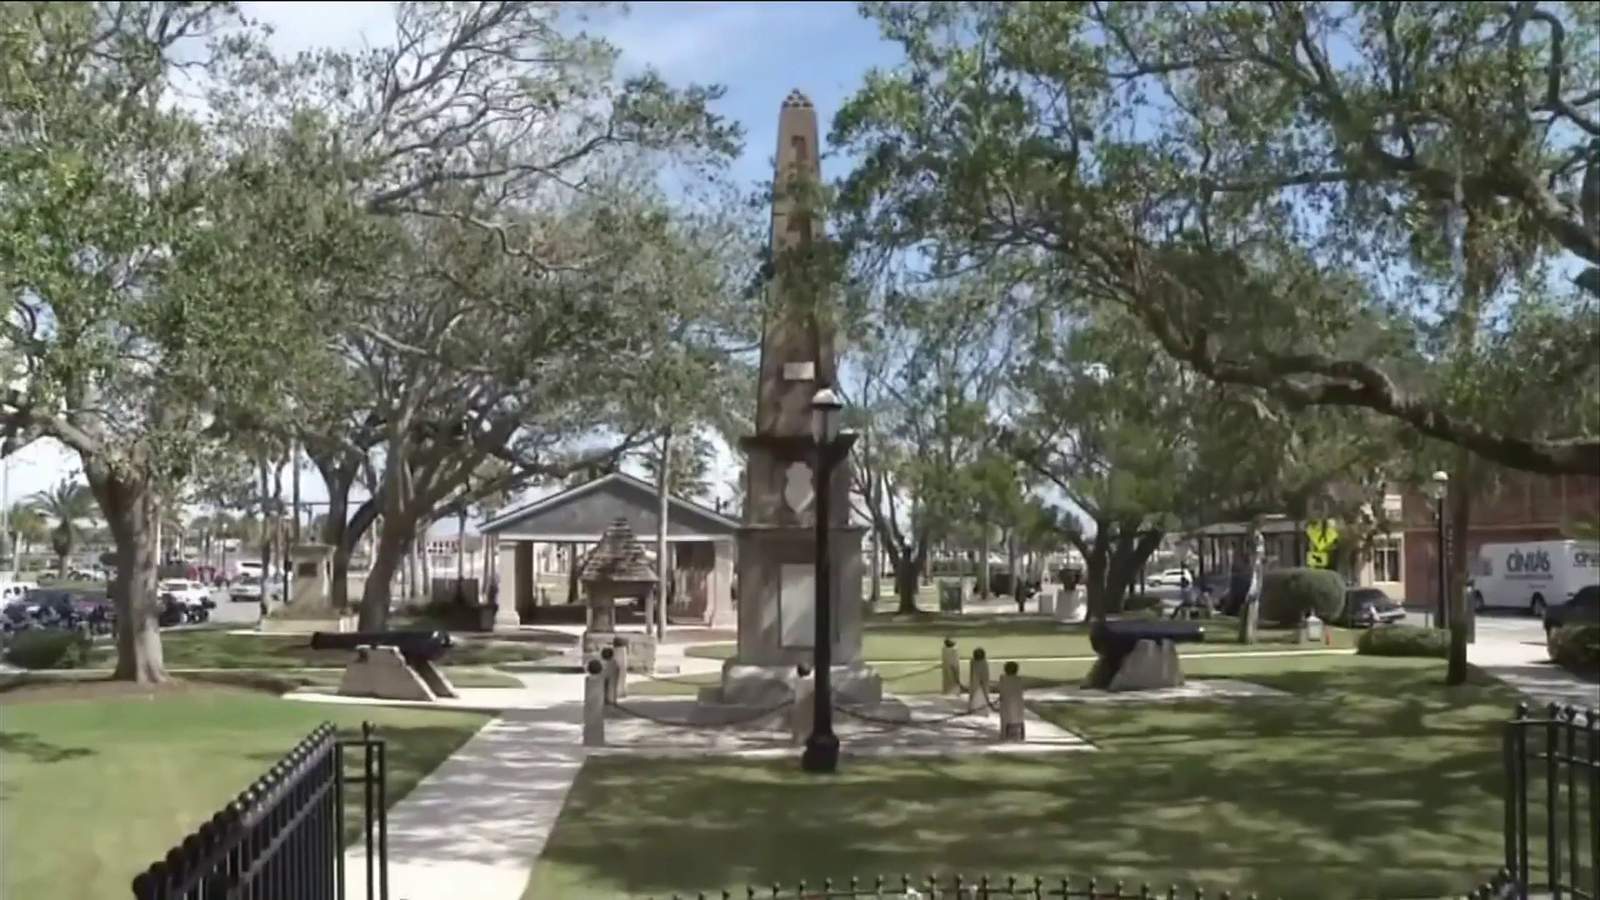 New lawsuit filed against City of St. Augustine over Confederate memorial